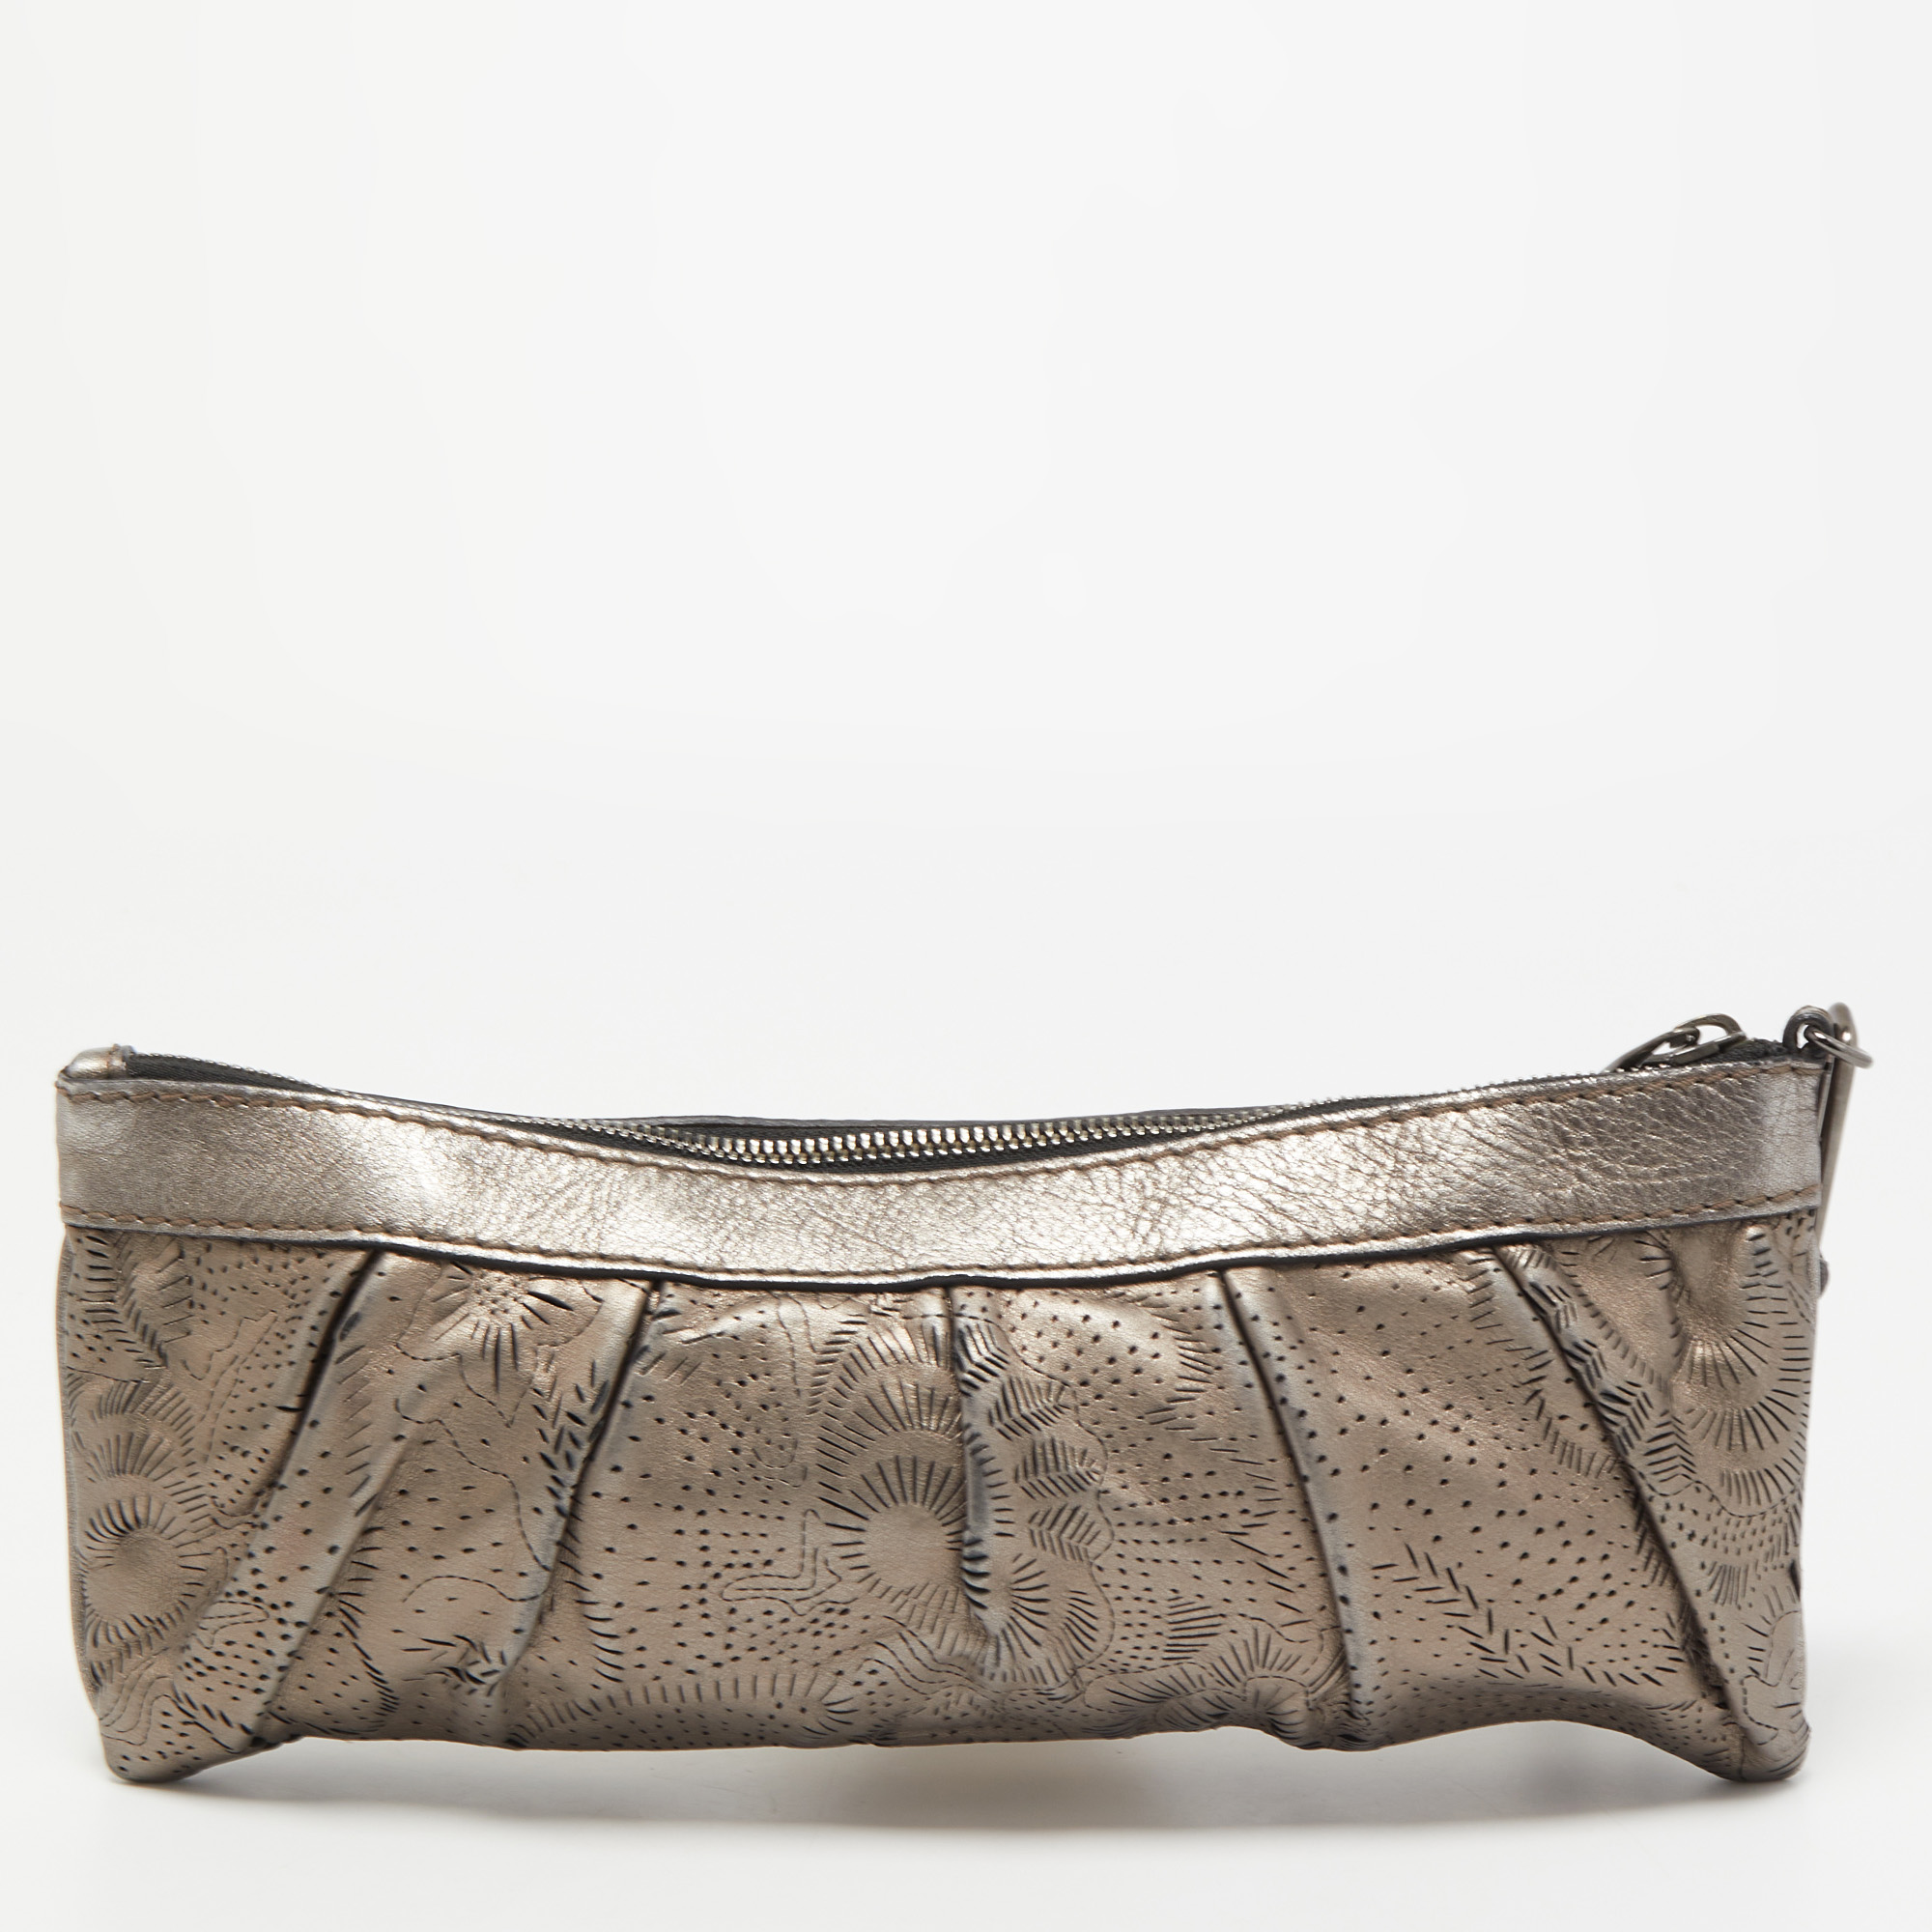 Burberry Metallic Perforated Floral Leather Wristlet Pouch